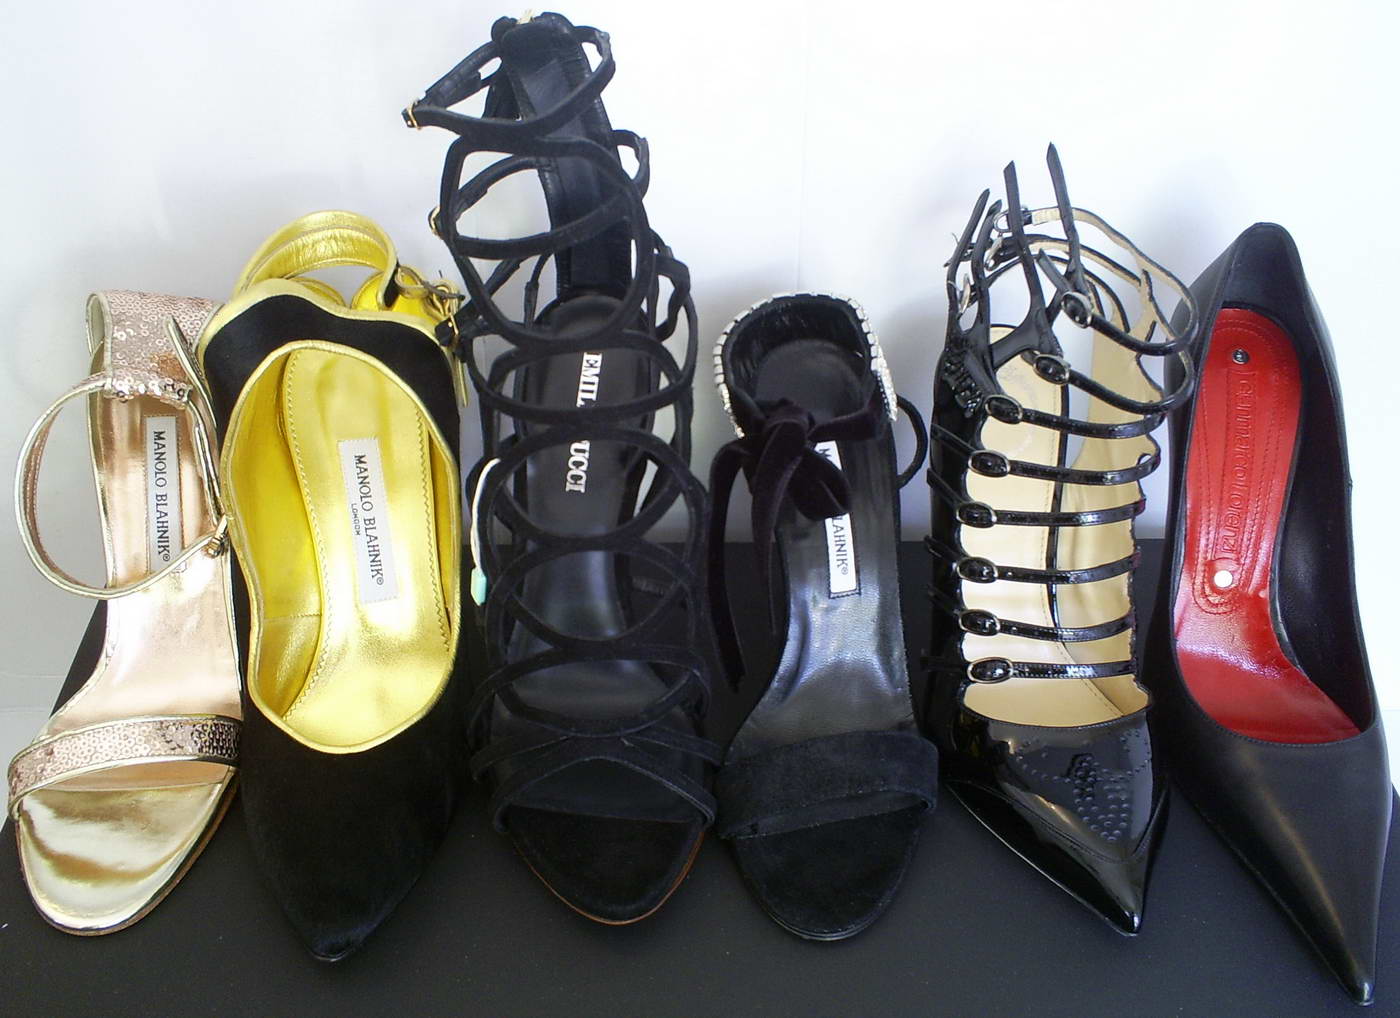 My shoe collection - For the girls - High Heel Place